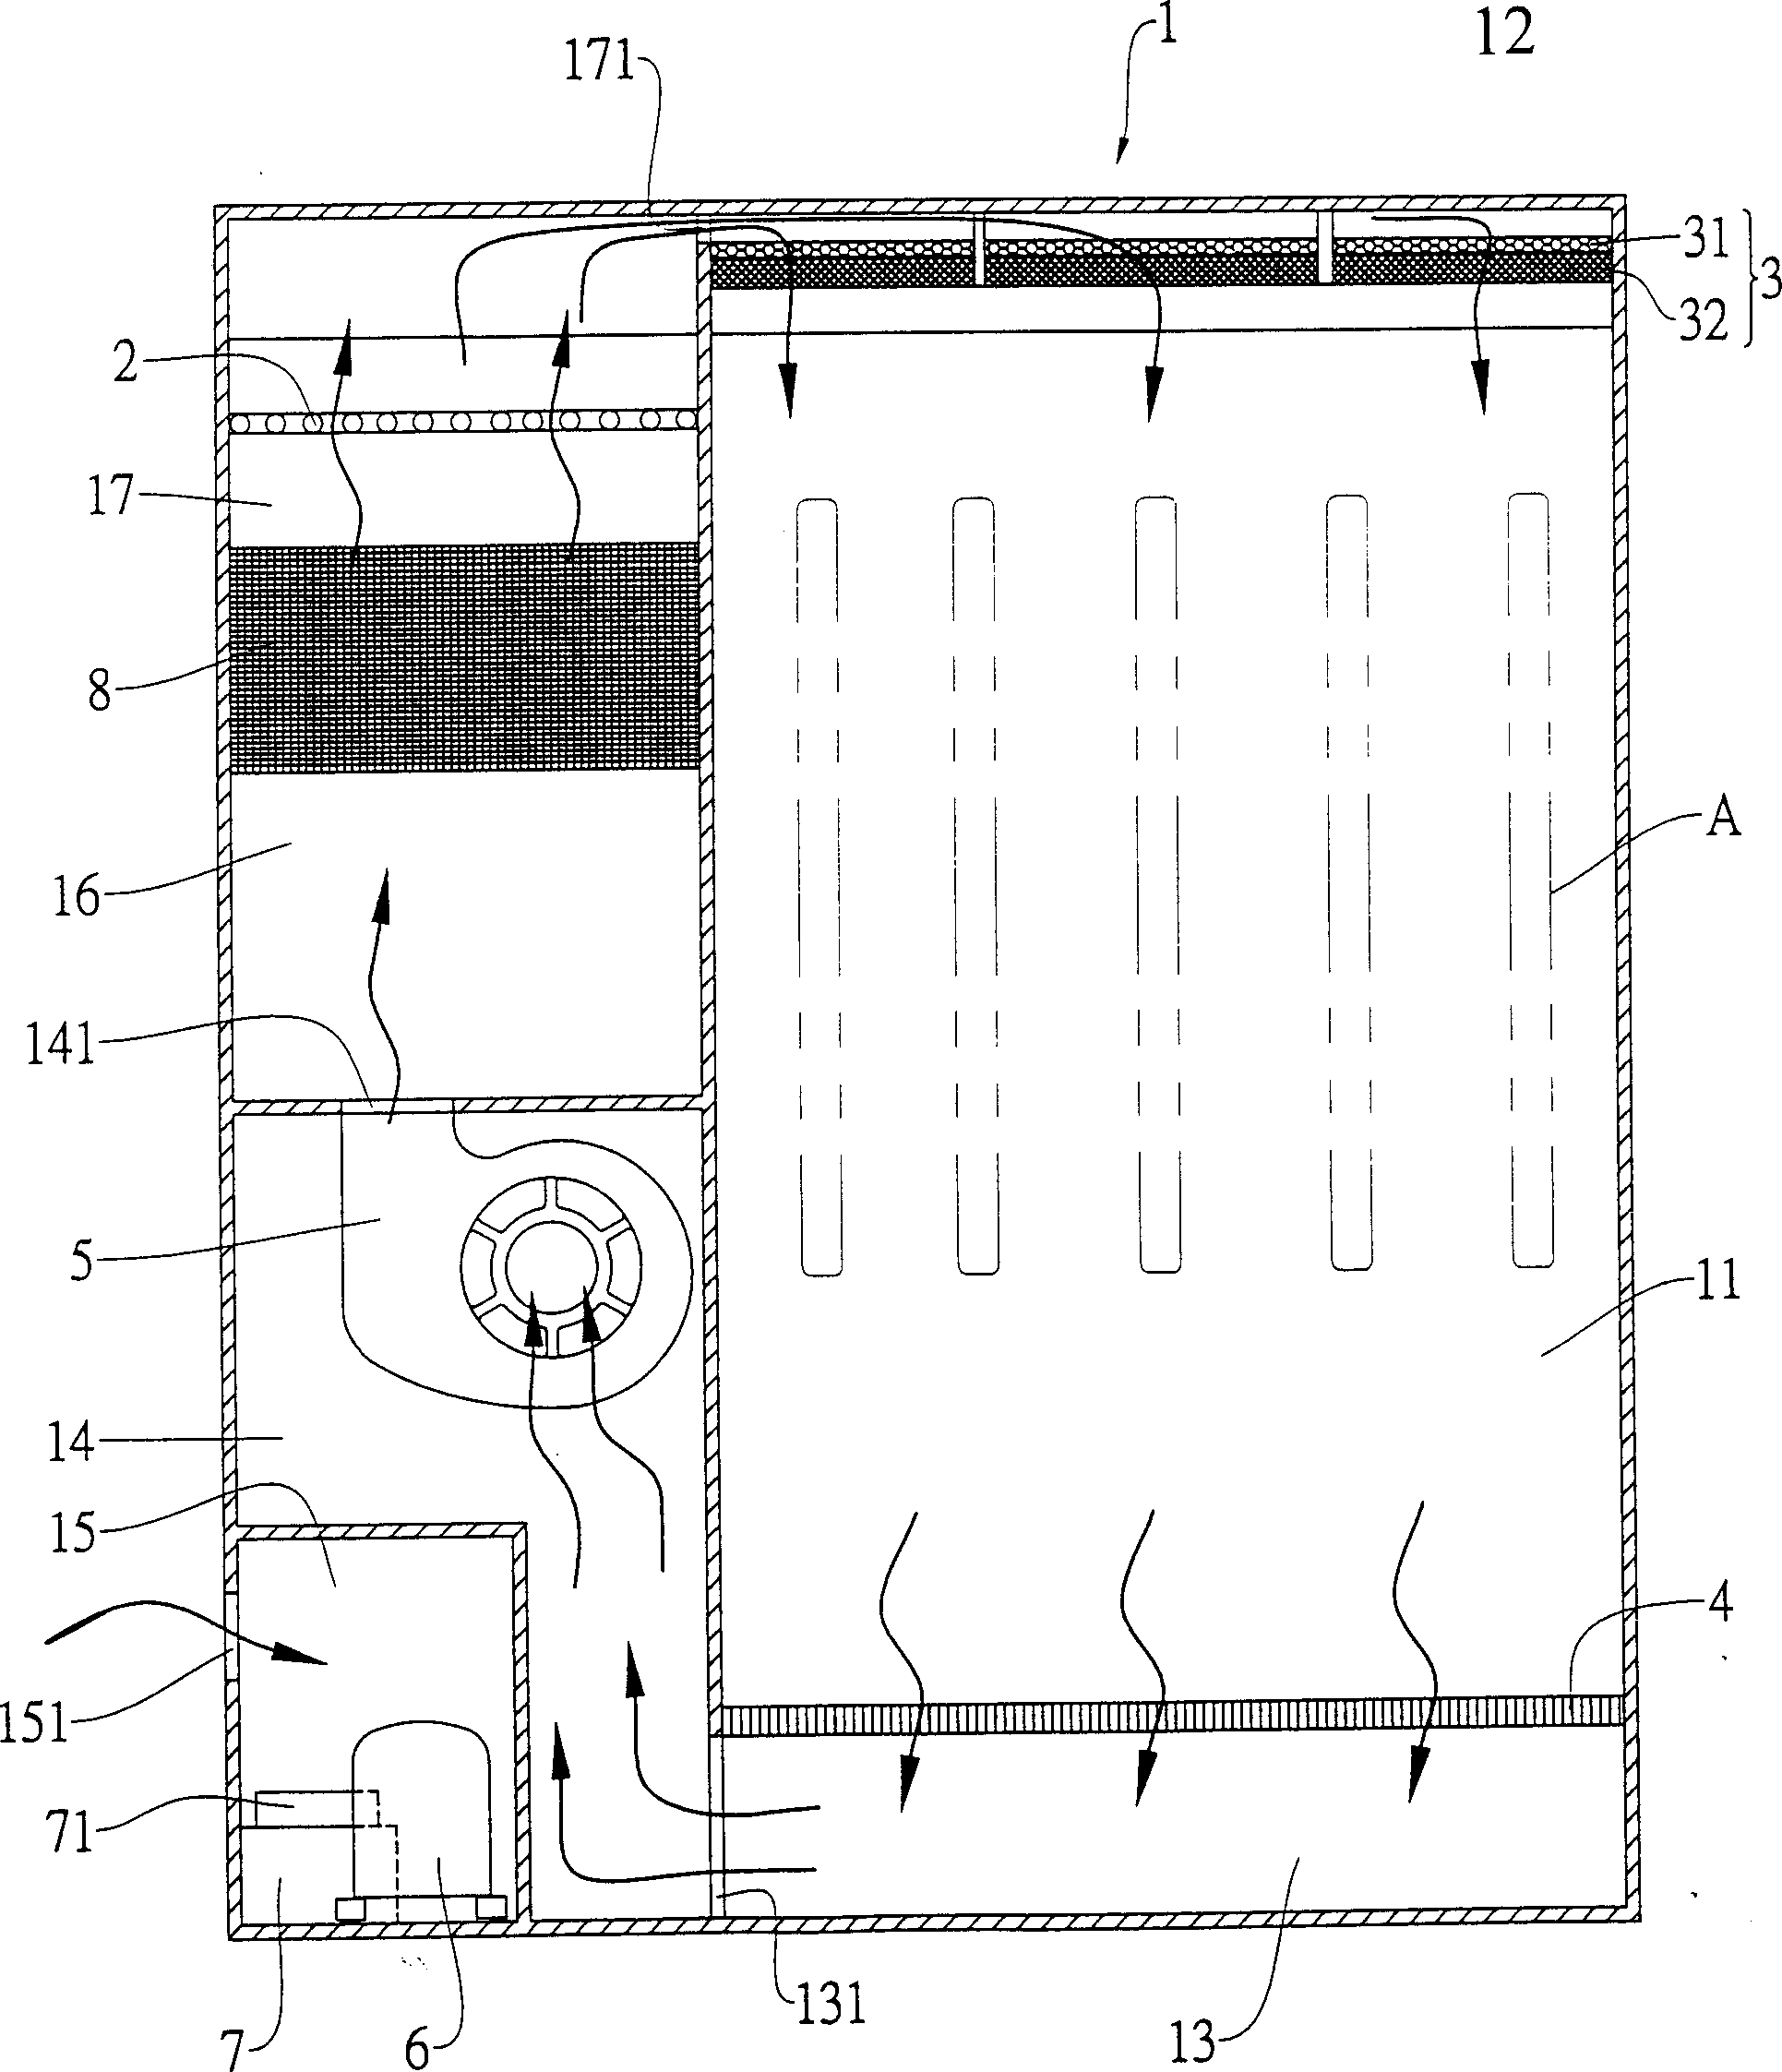 Method for drying articles used in dust-free room